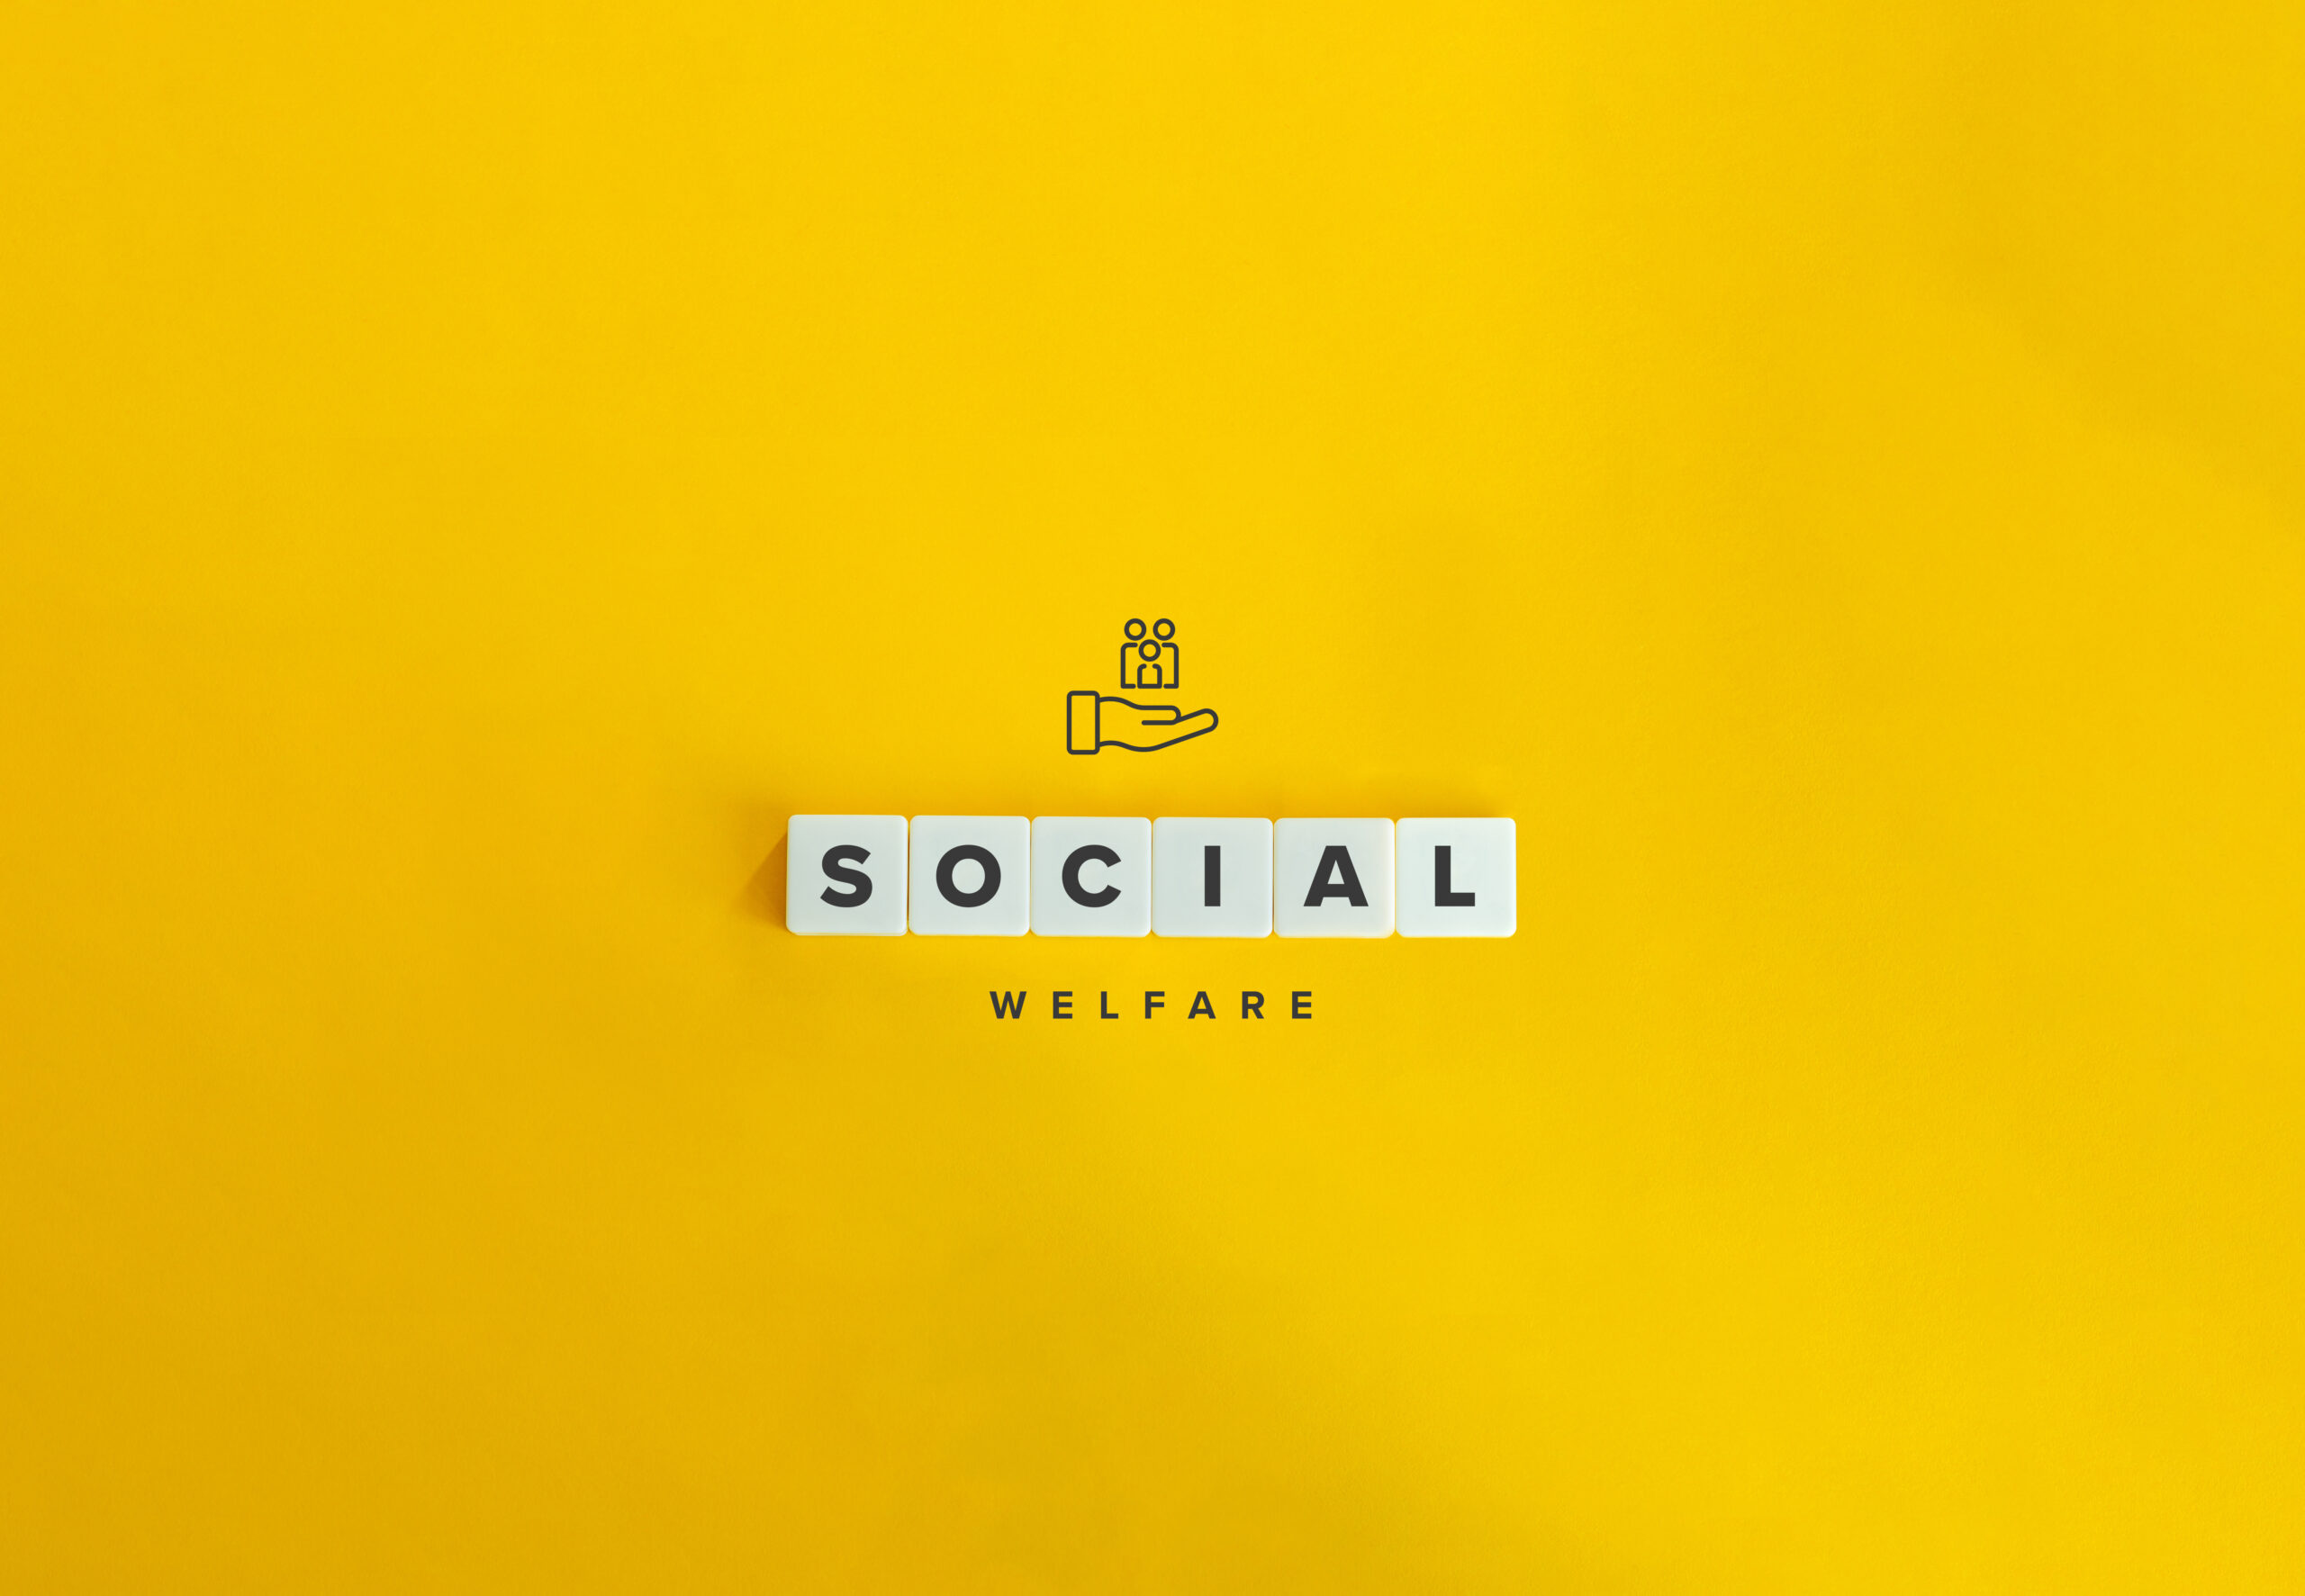 "SOCIAL" in tile letters and "WELFARE" in smaller font against a yellow background